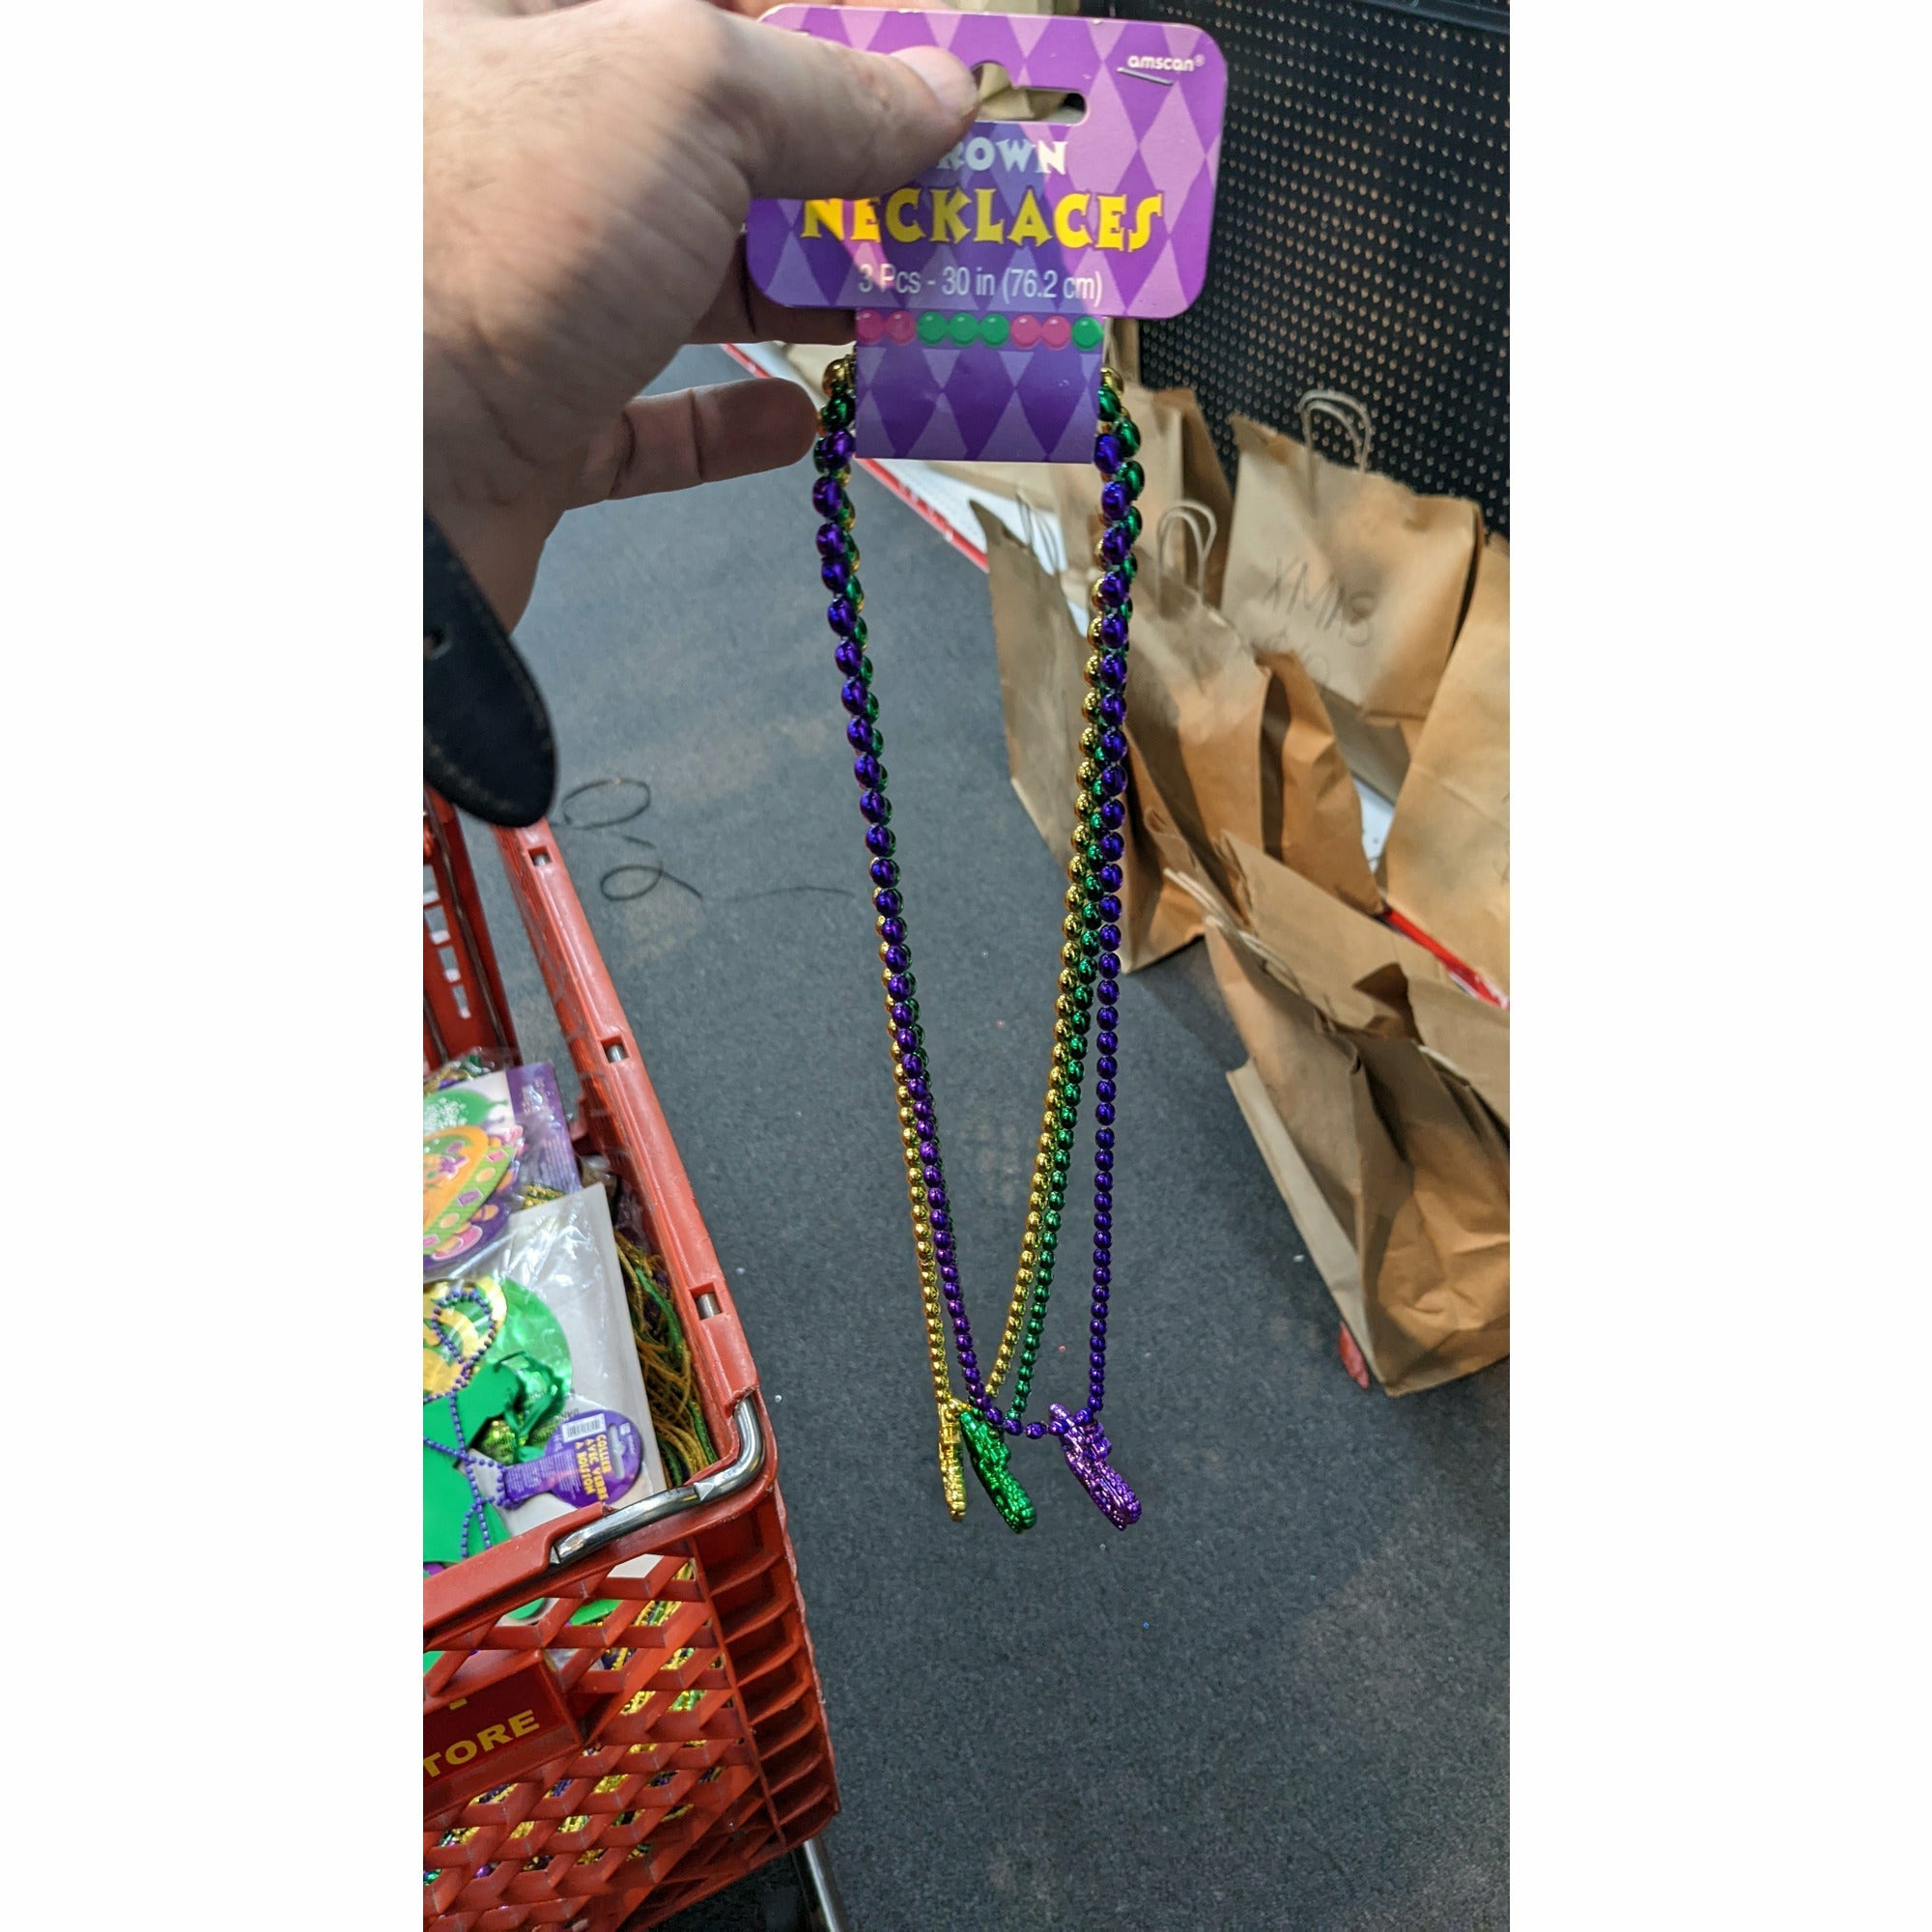 Amscan HOLIDAY: MARDI GRAS Green, Purple and Gold Plastic Crown Pendant Mardi Gras Bead Necklaces